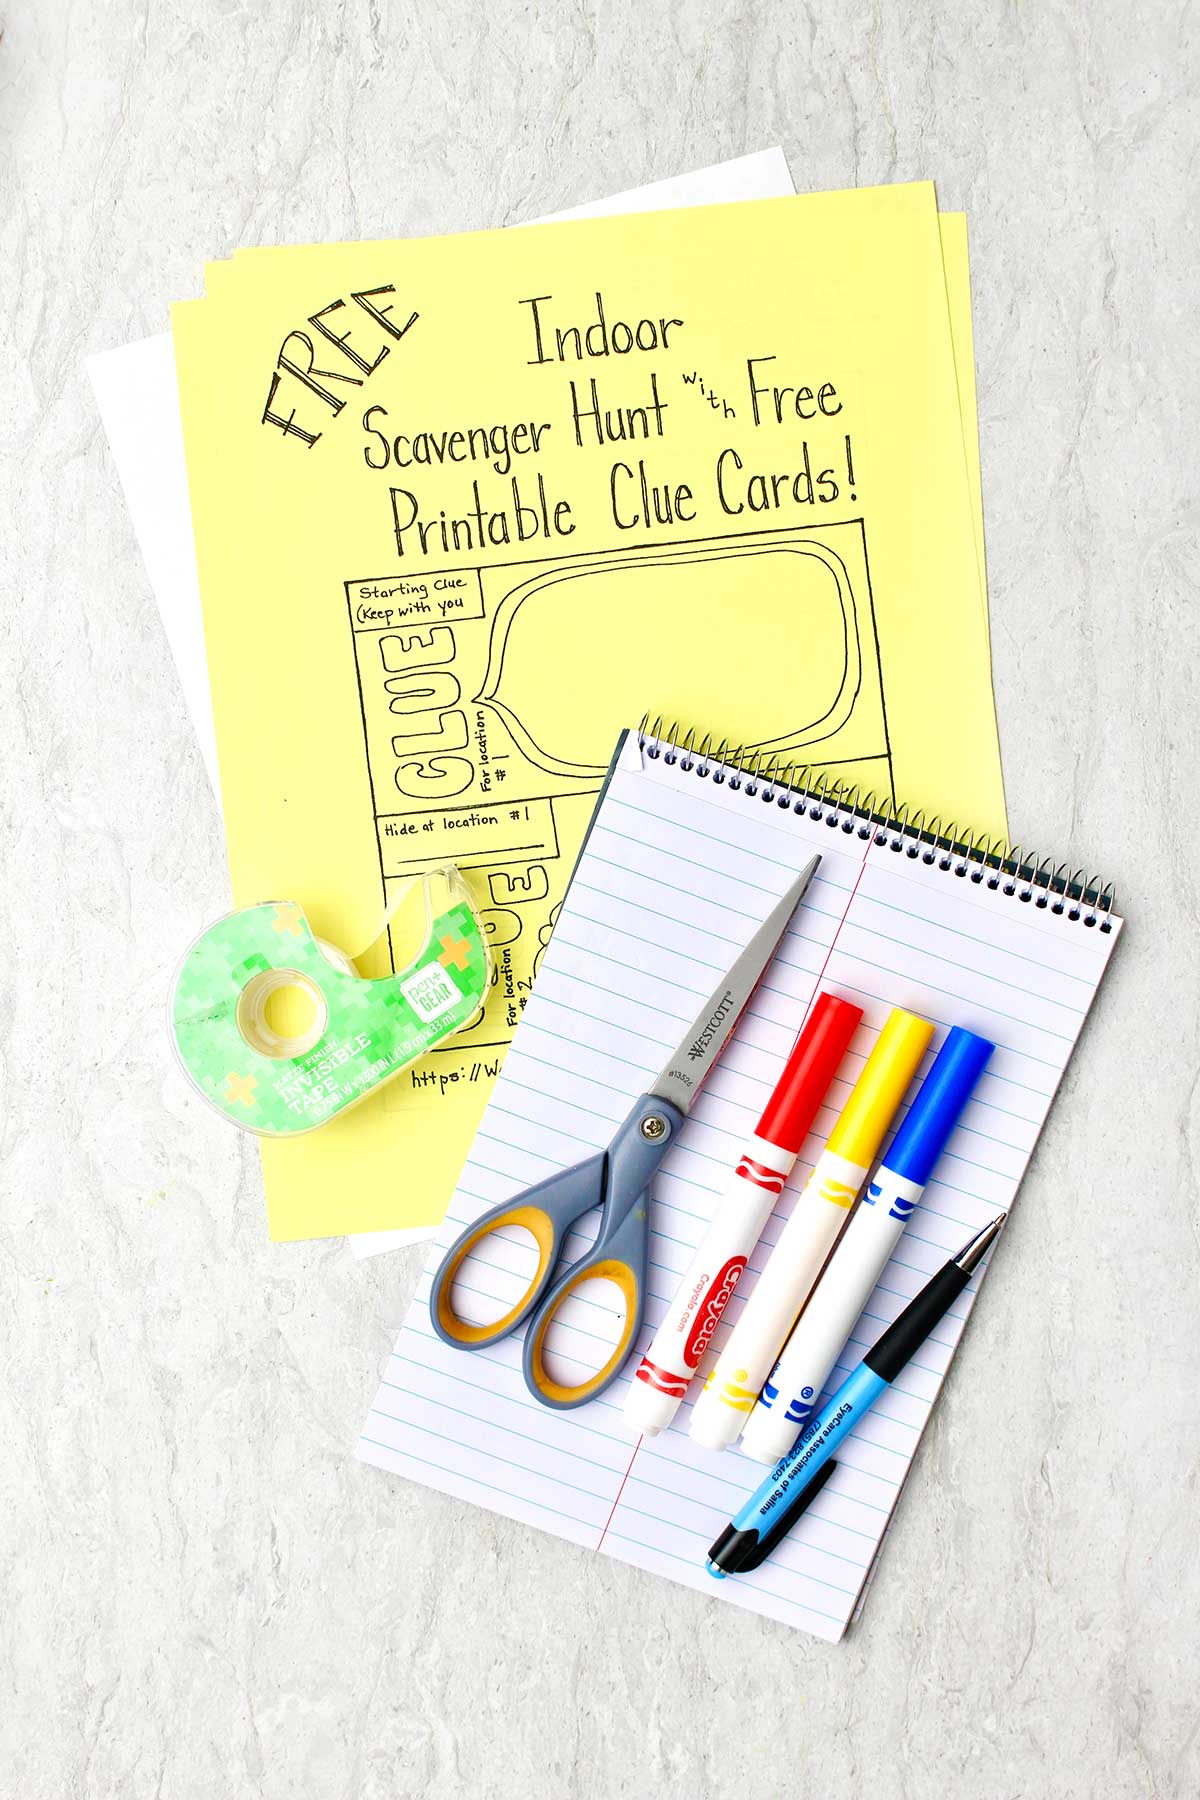 Indoor Scavenger Hunt Free Printable Clue Cards, tape, scissors, markers, paper and a pen.